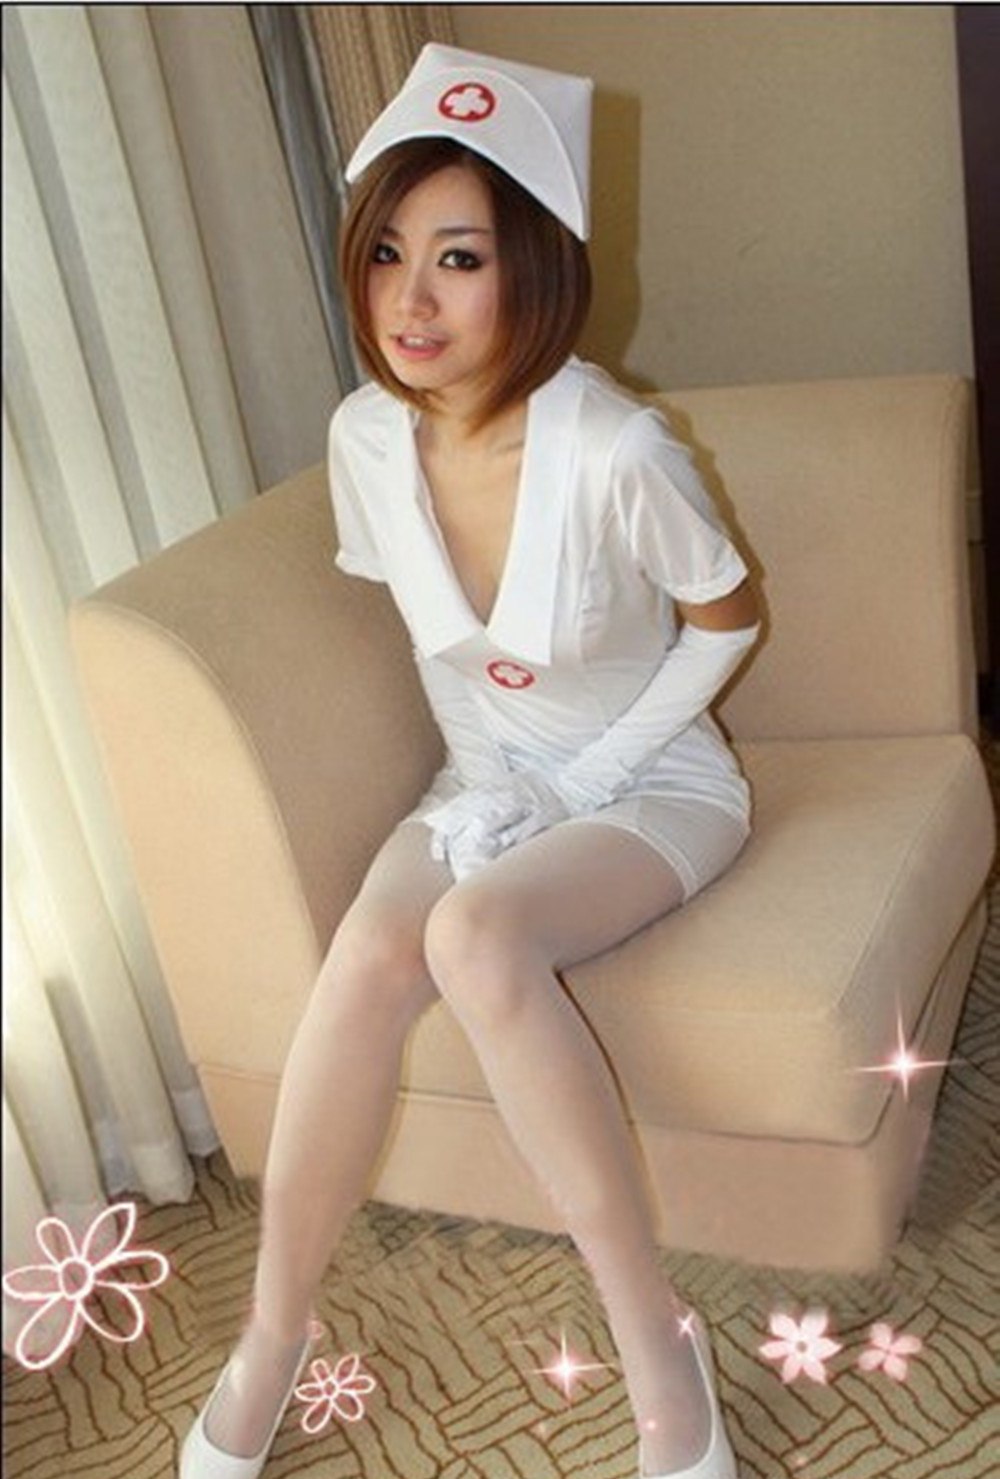 Nurse style dress suit Cosplay Costume Lady Uniform - TRIPLE AAA Fashion Collection